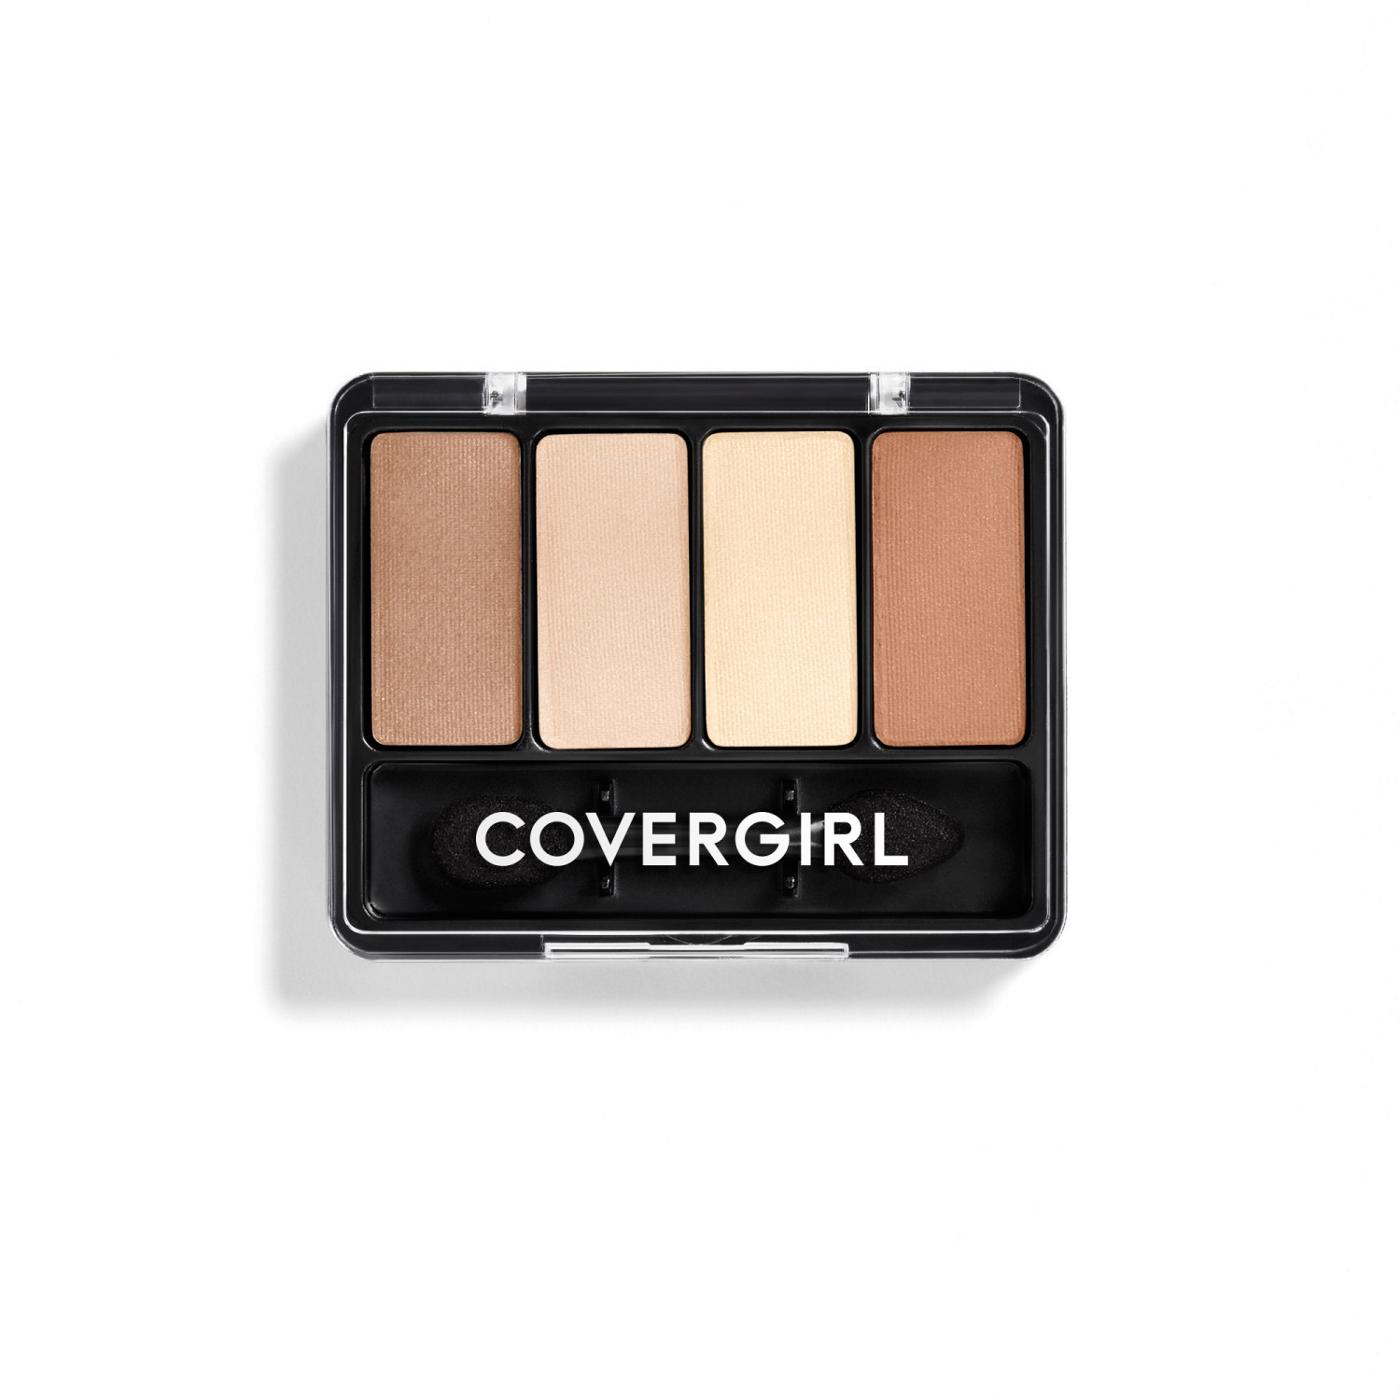 Covergirl Eye Enhancers Shadows 4-Kit 215 Country Woods; image 1 of 4